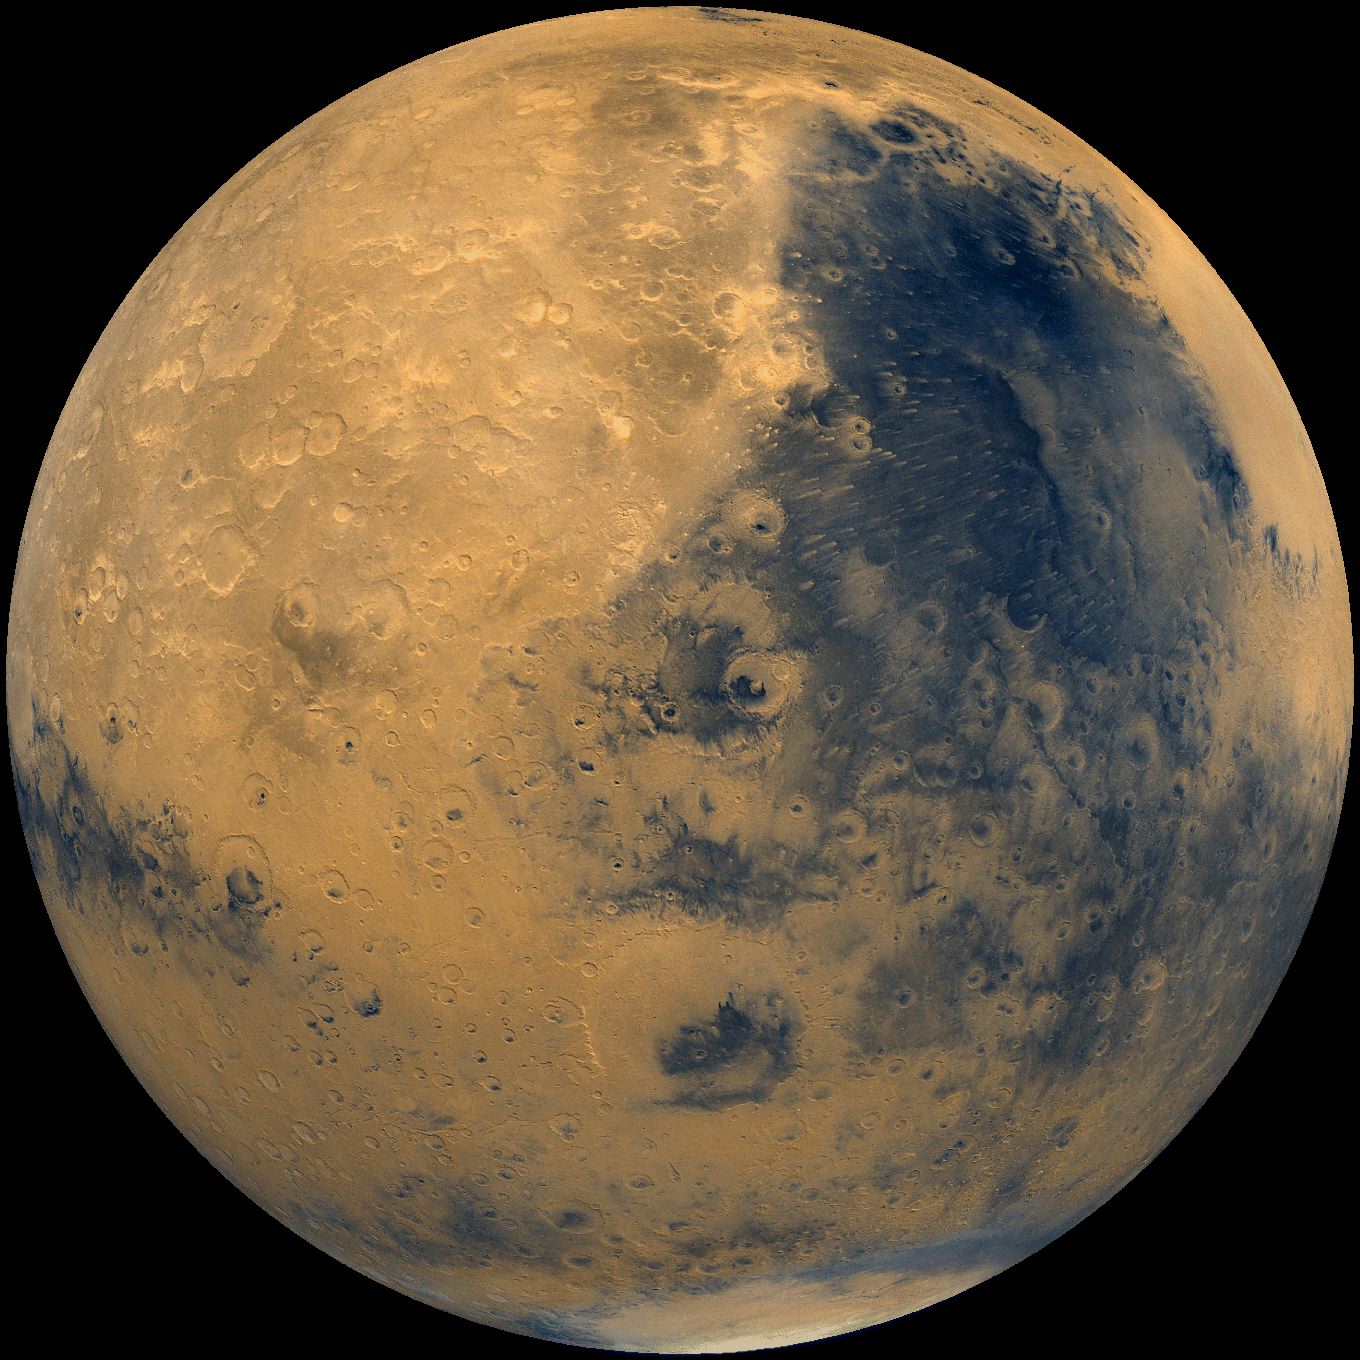 Mars: Home of the Robots